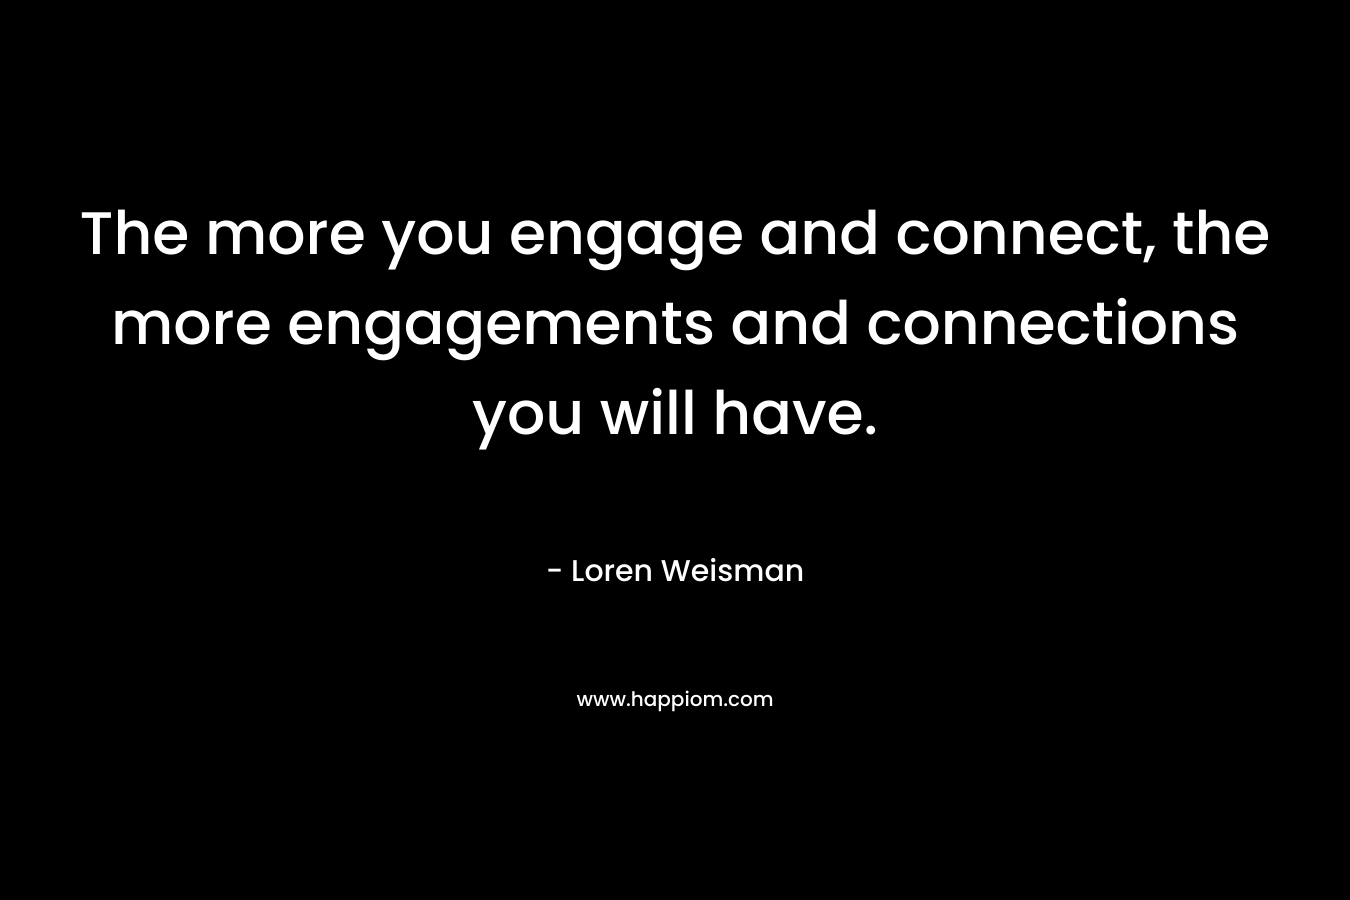 The more you engage and connect, the more engagements and connections you will have. – Loren Weisman